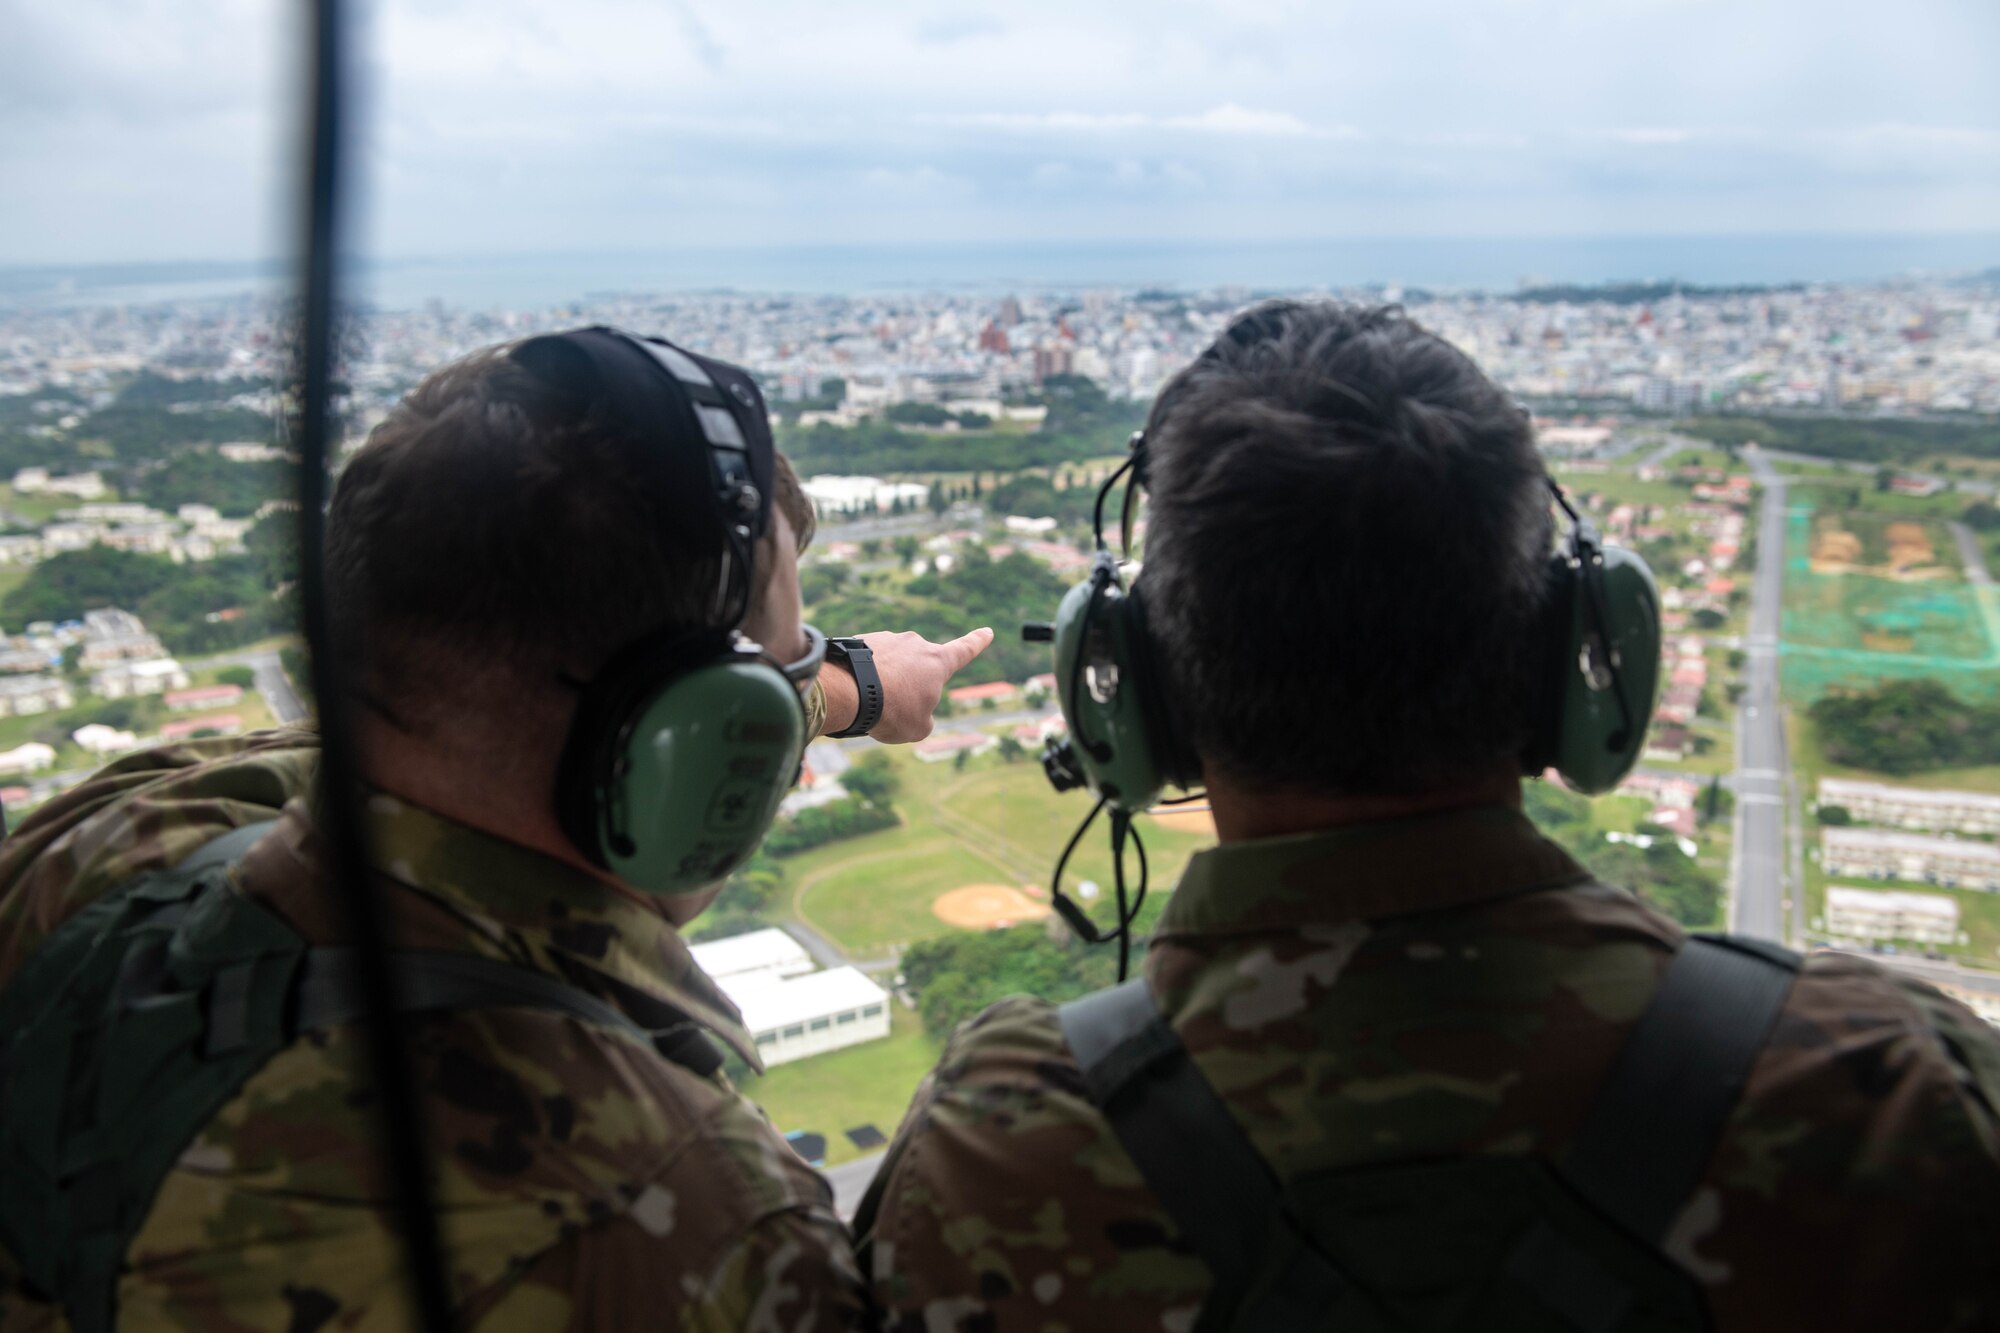 Two Airmen point into the distance on a helicopter.